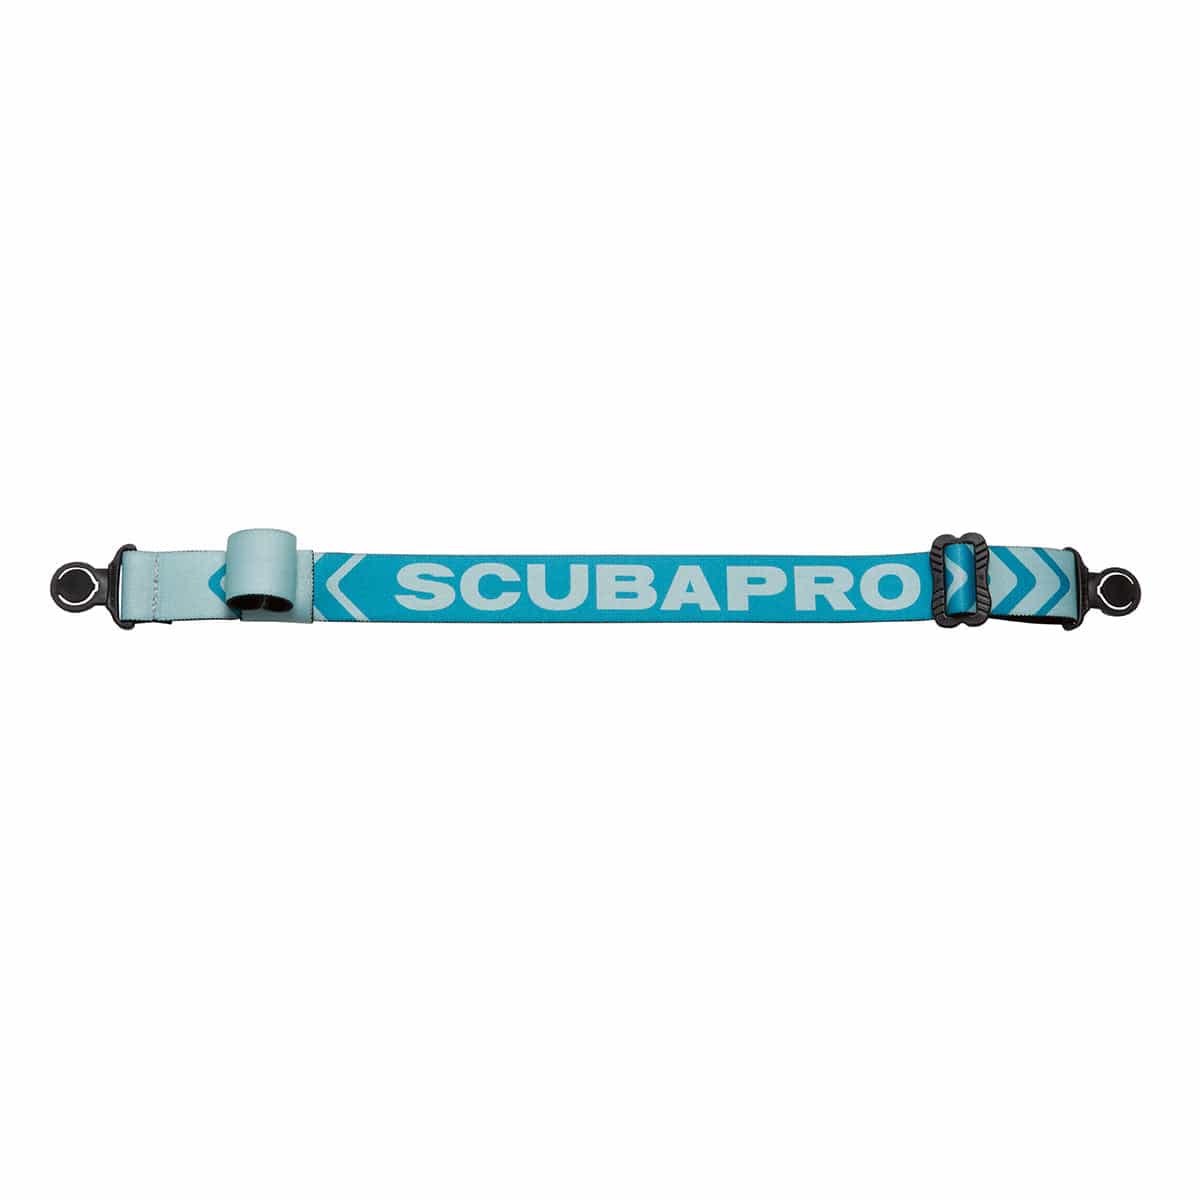 Scubapro Comfort Strap - Turquoise - 24.730.020-NED - 24